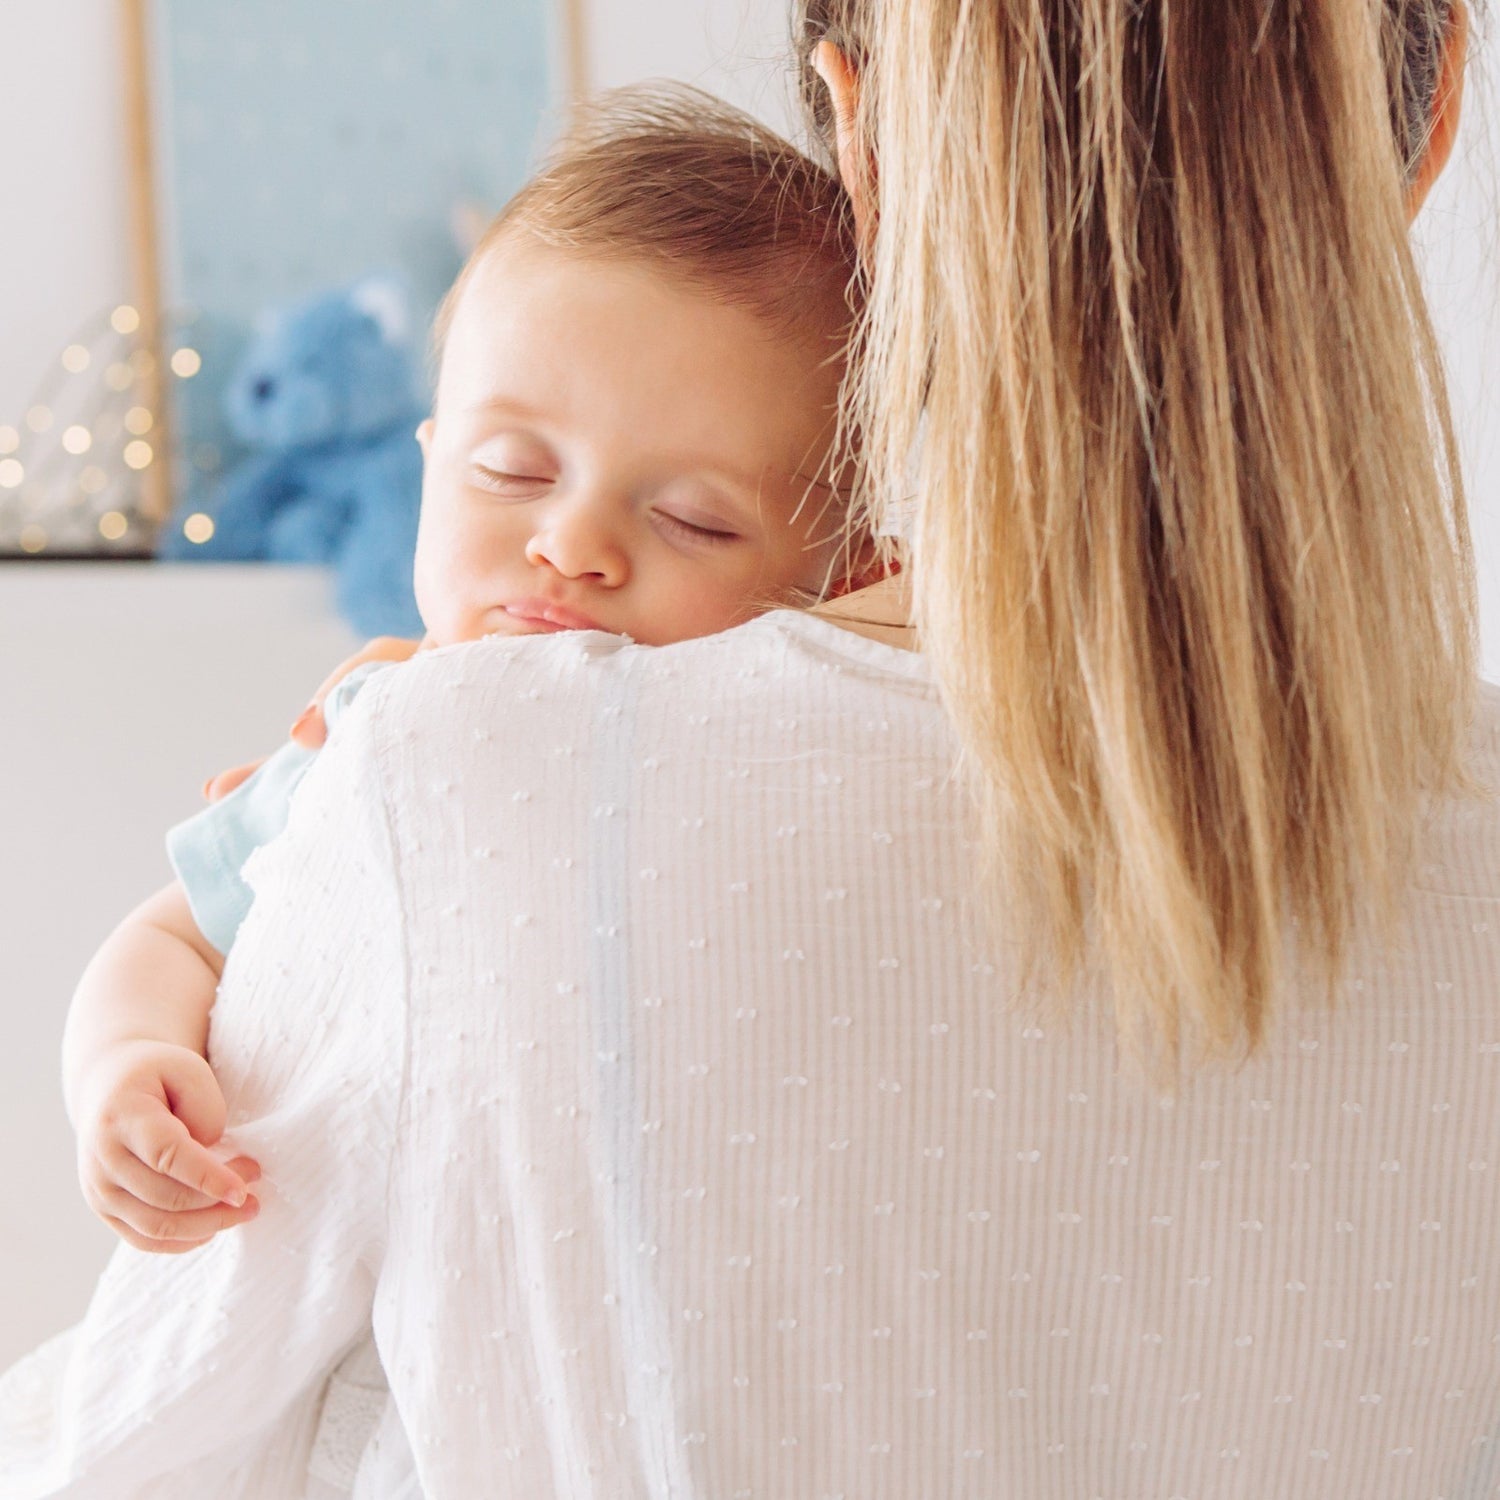 Understanding Sleep Cues: A Guide to Navigating Nap-time and Bedtime with Your Little One